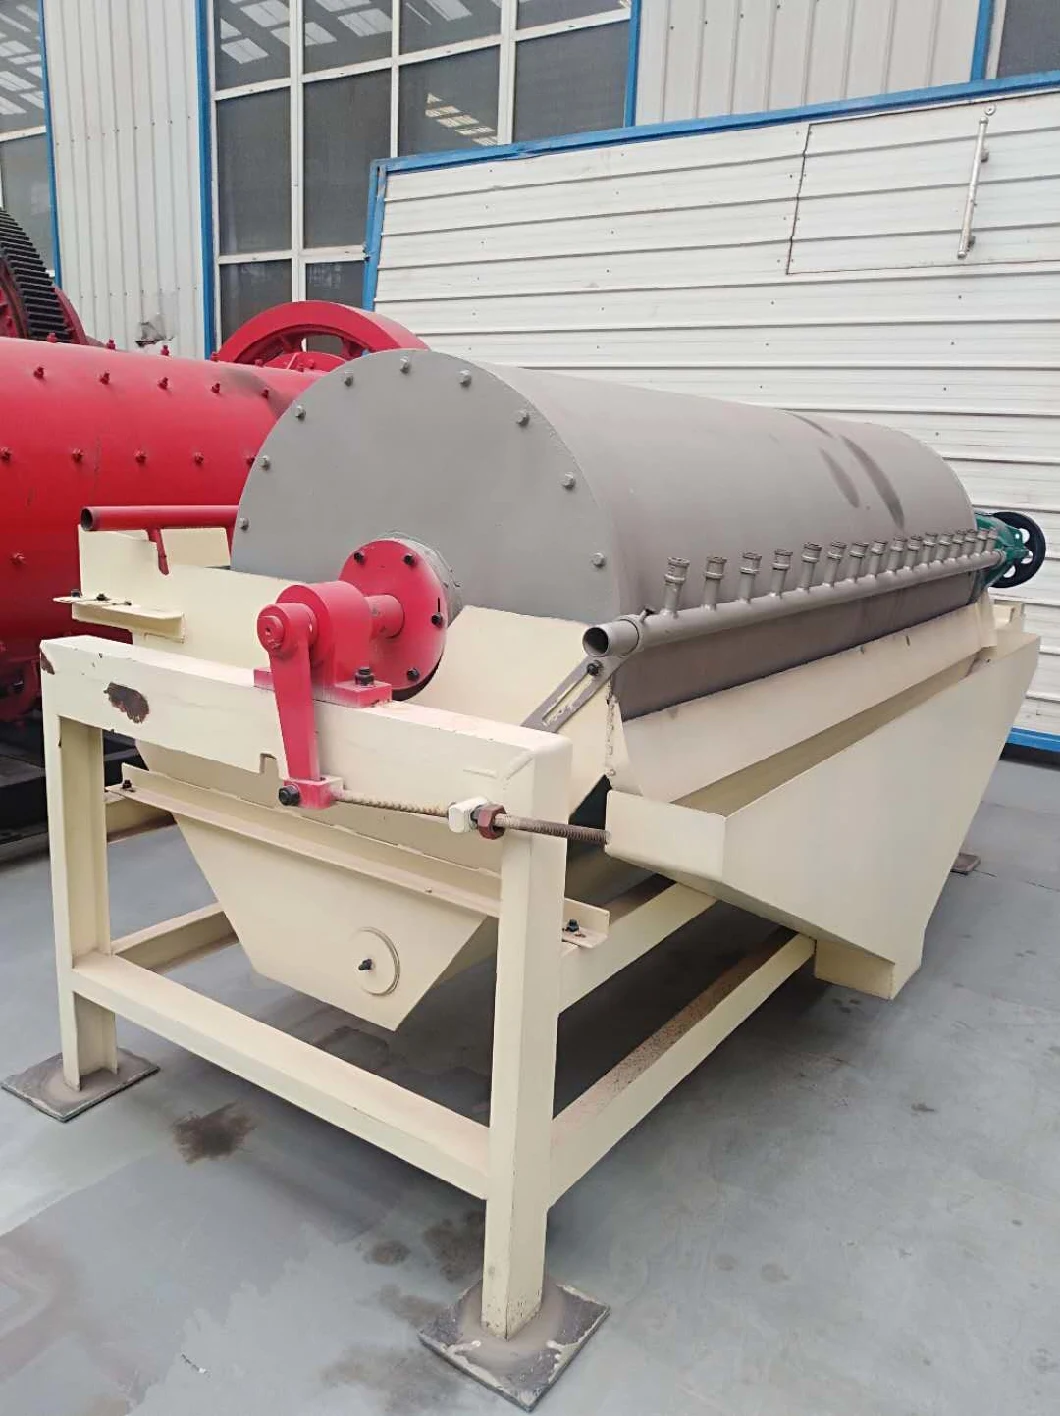 CTB Series Small Iron Magnetic Separator, Drum Magnetic Separator with Permanent Gauss